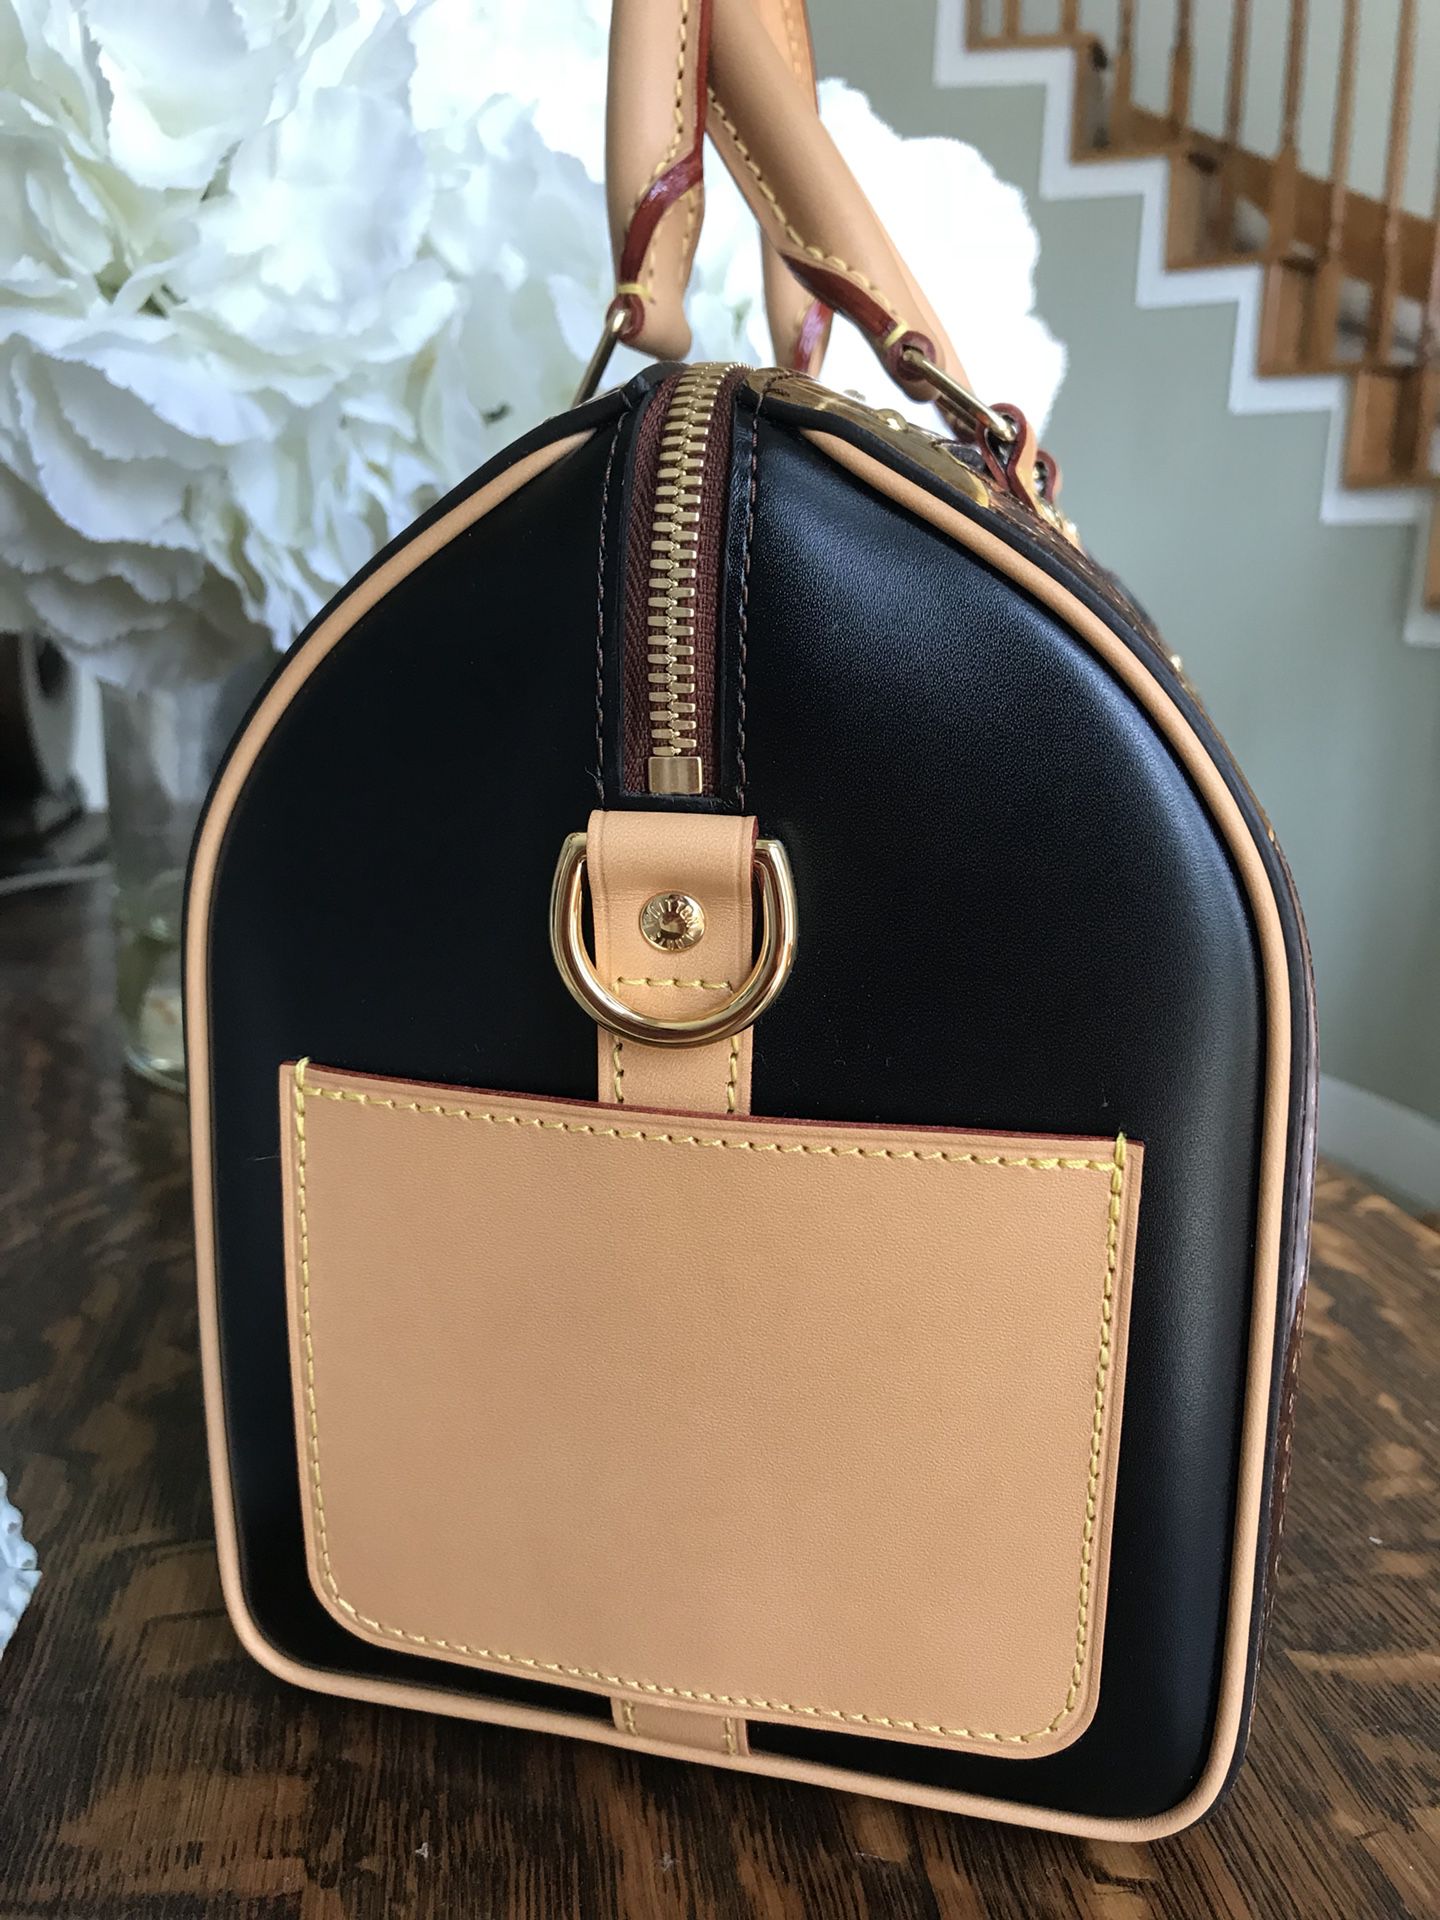 Louis Vuitton Brown Monogram Coated Canvas Speedy 35 Bag for Sale in Sunset  Valley, TX - OfferUp